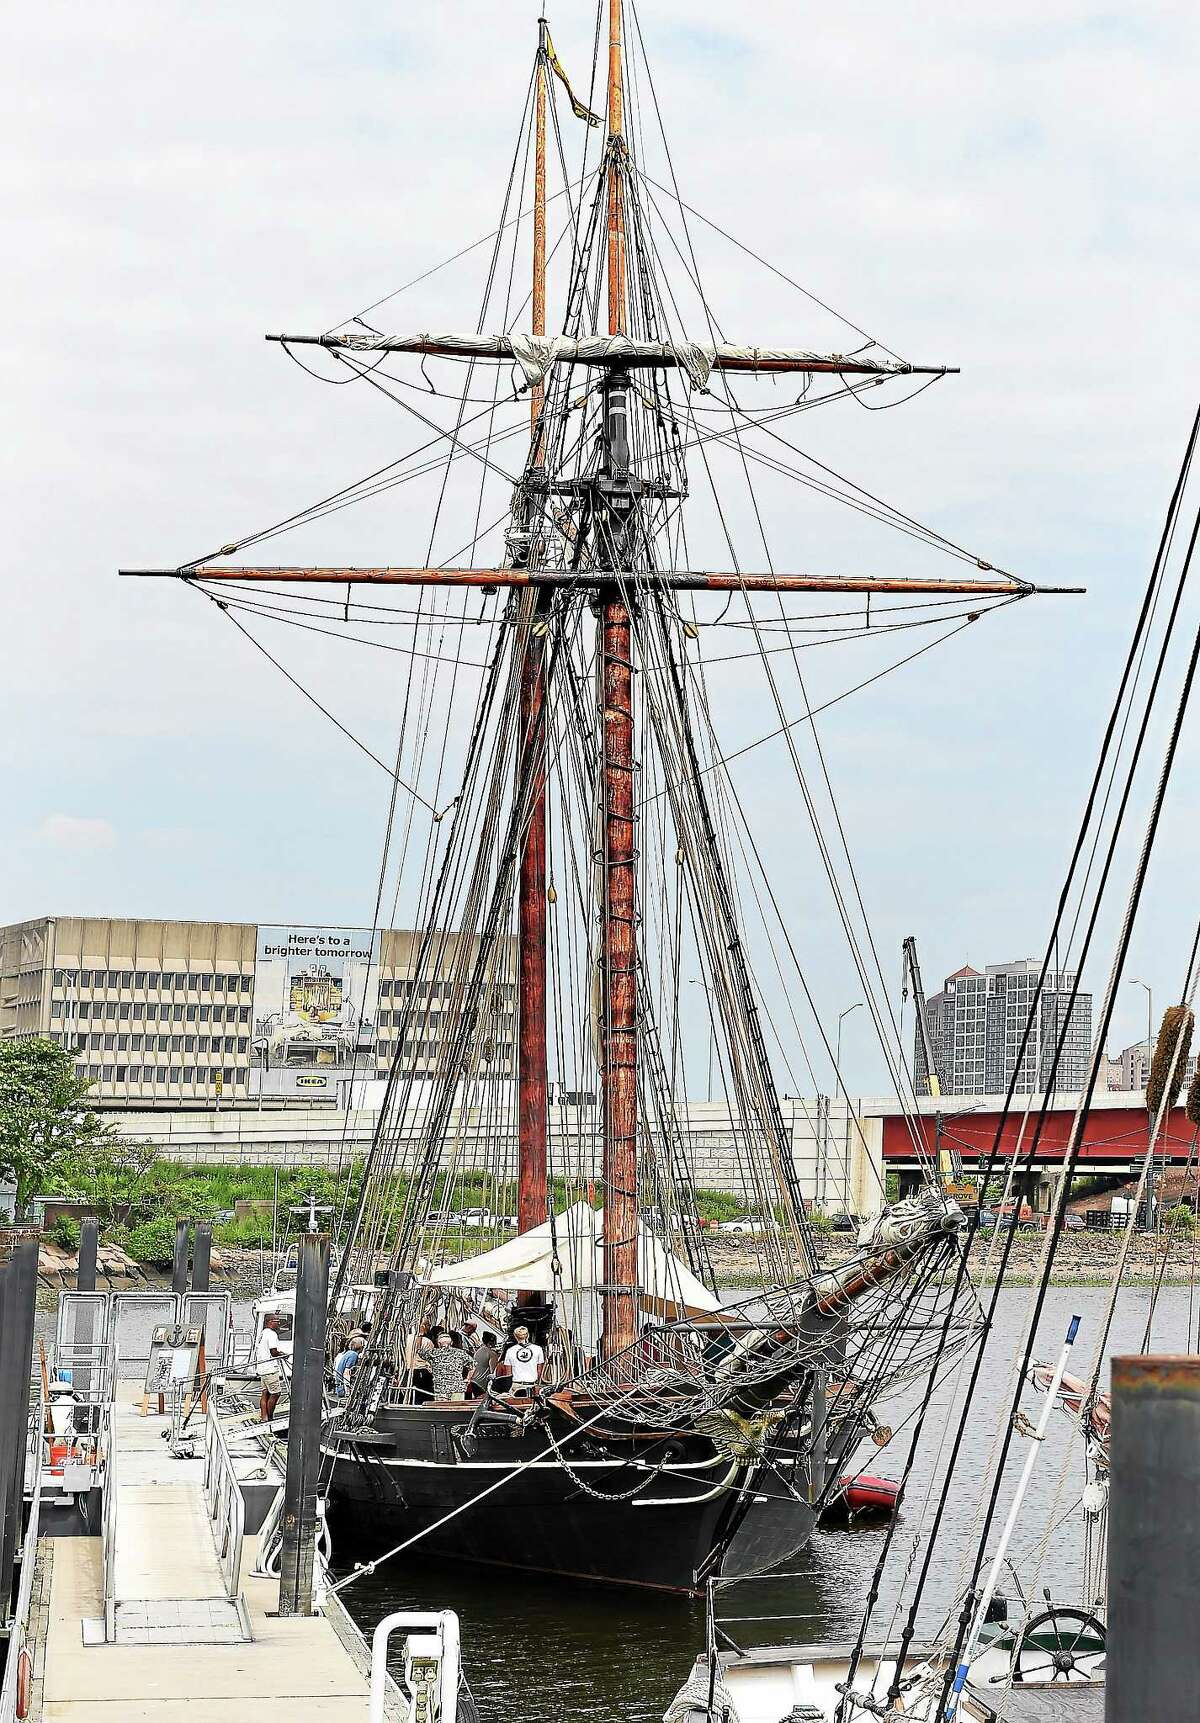 The Amistad, is docked in New Haven Harbor during the homecoming ceremony. The boat will be in Long Island Sound for most of the summer, with many events and public trips planned. July 2, 2014.